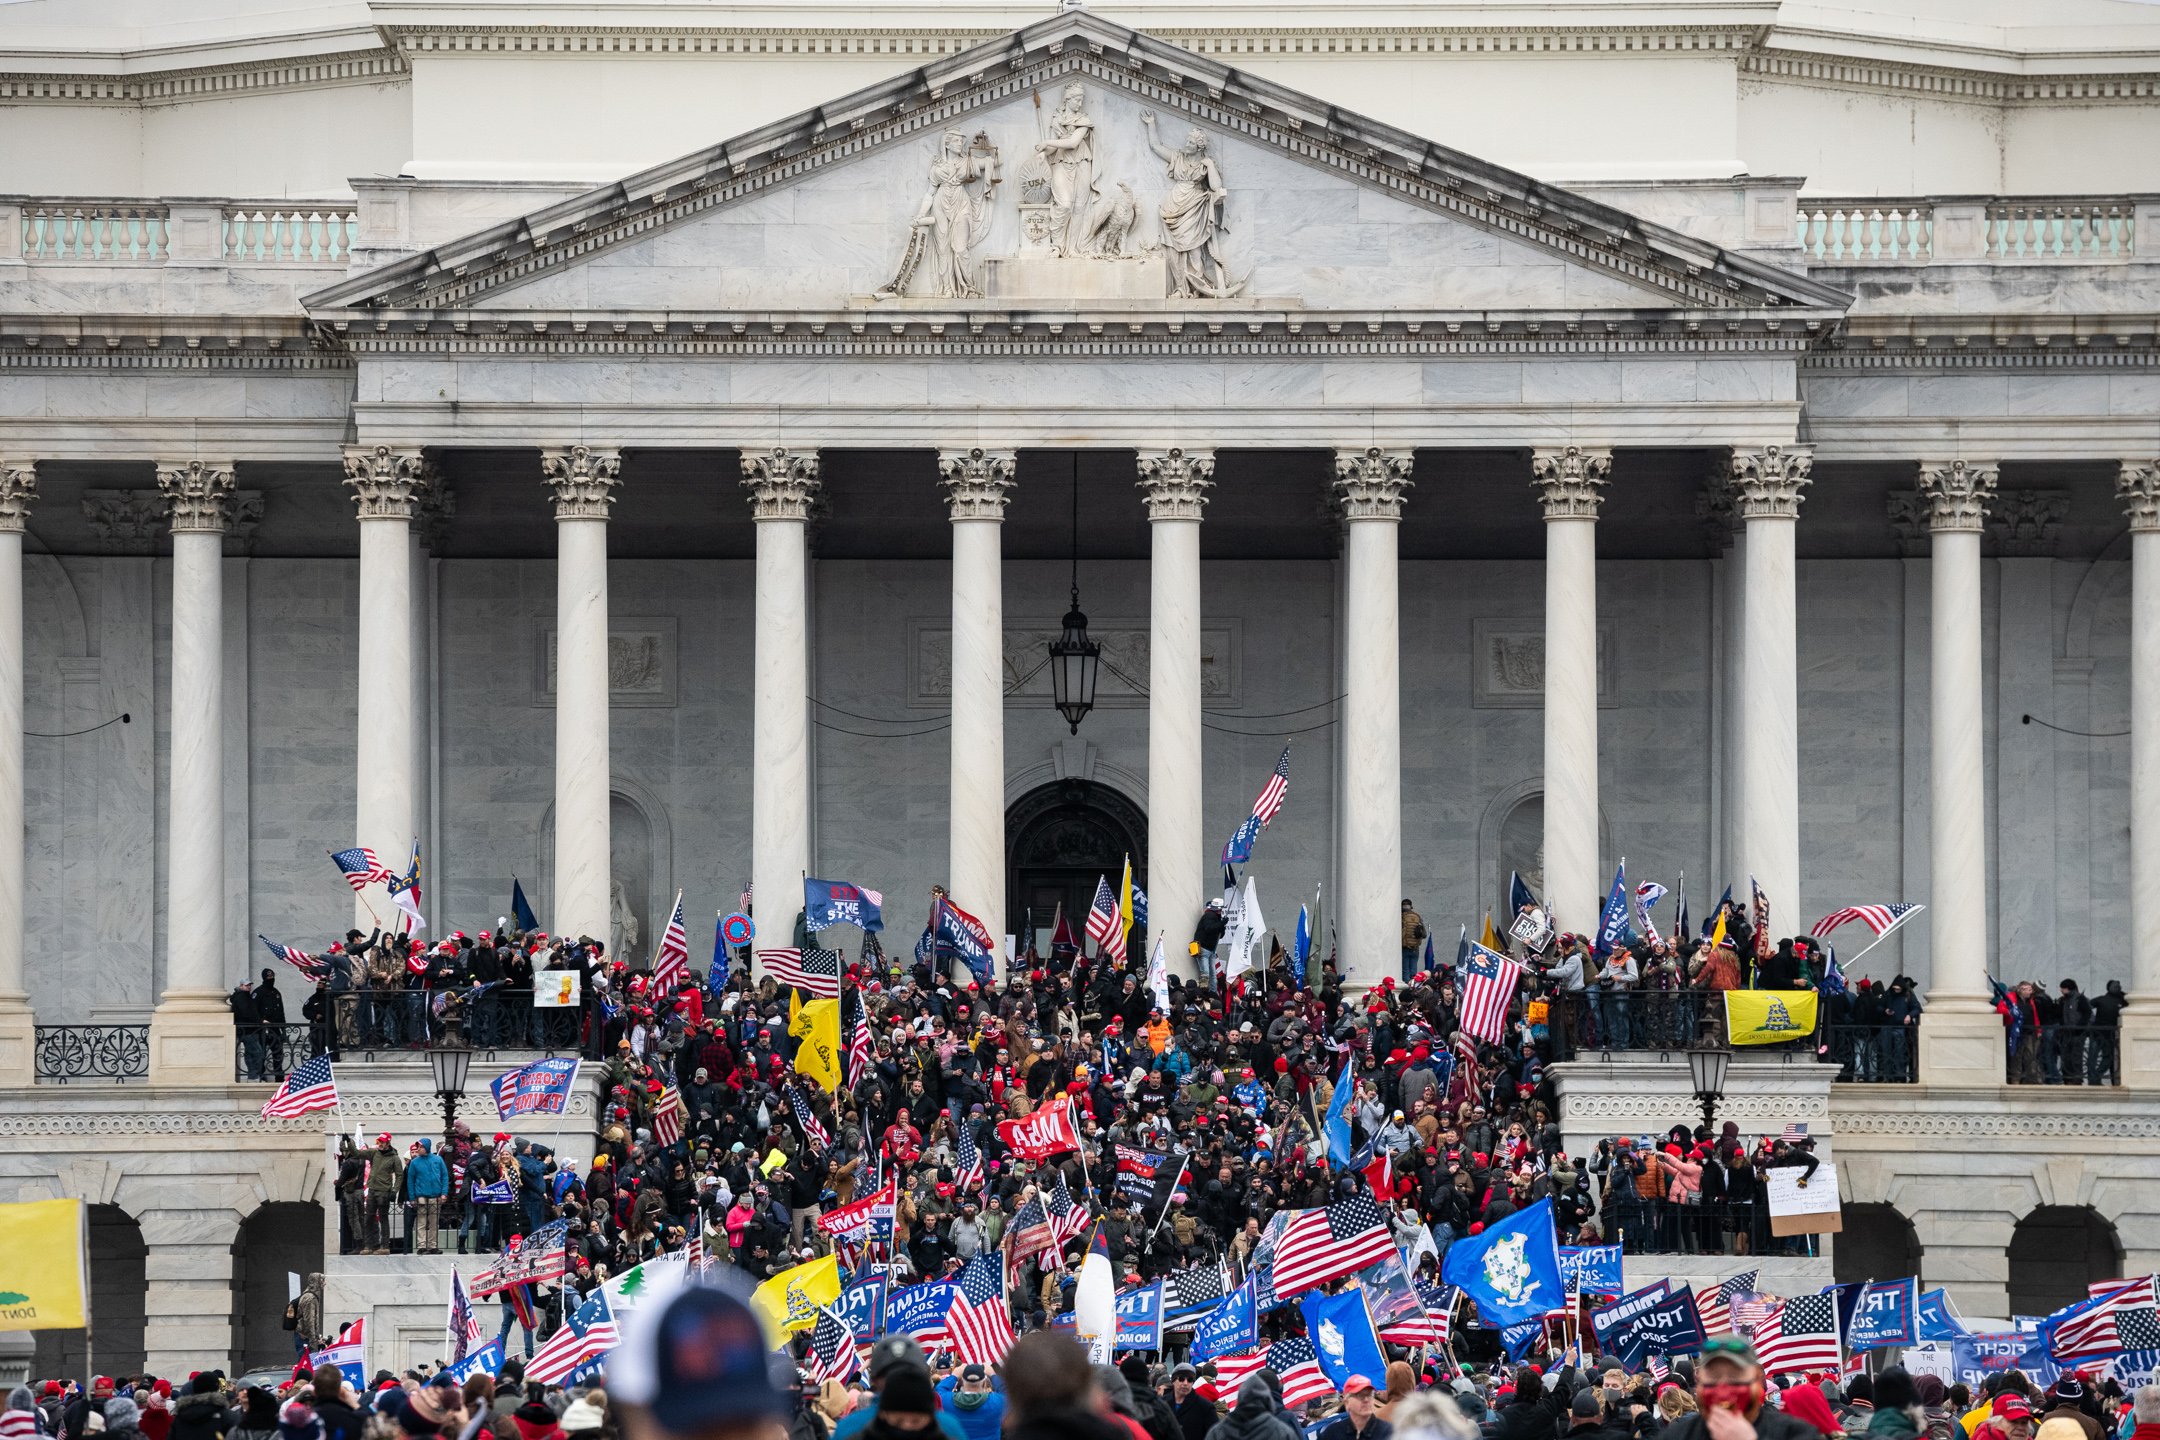  Pro-Trump rioters storm the East Front of the U.S. Capitol during the January 6 insurrection, in Washington, D.C., on January 6, 2021. (Graeme Sloan for Bloomberg) 